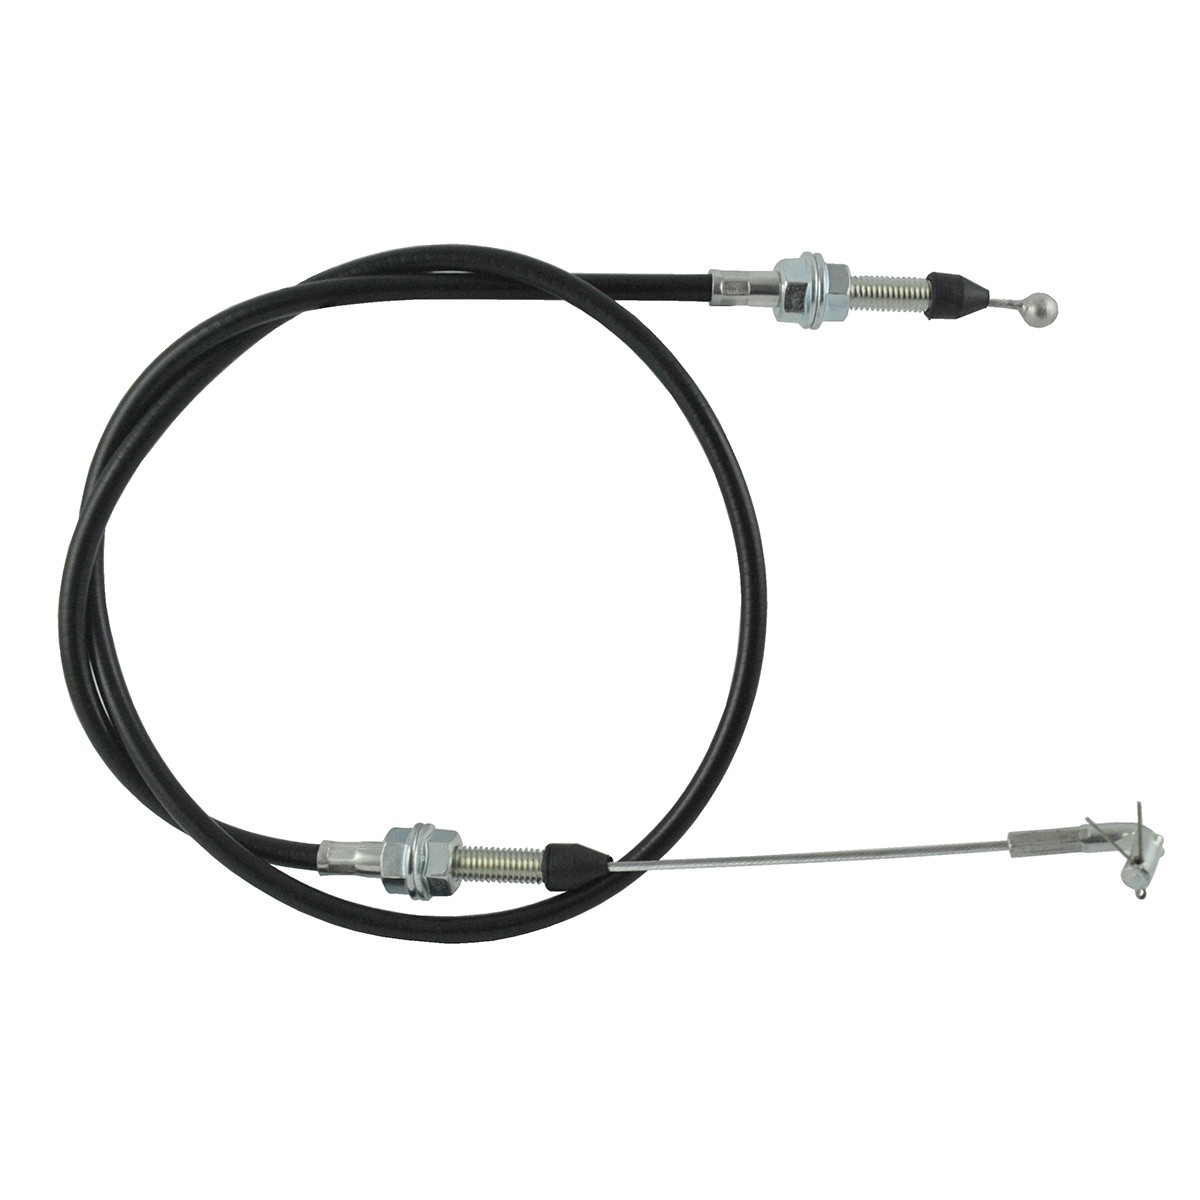 Throttle cable, Iseki Sial / 980 mm throttle